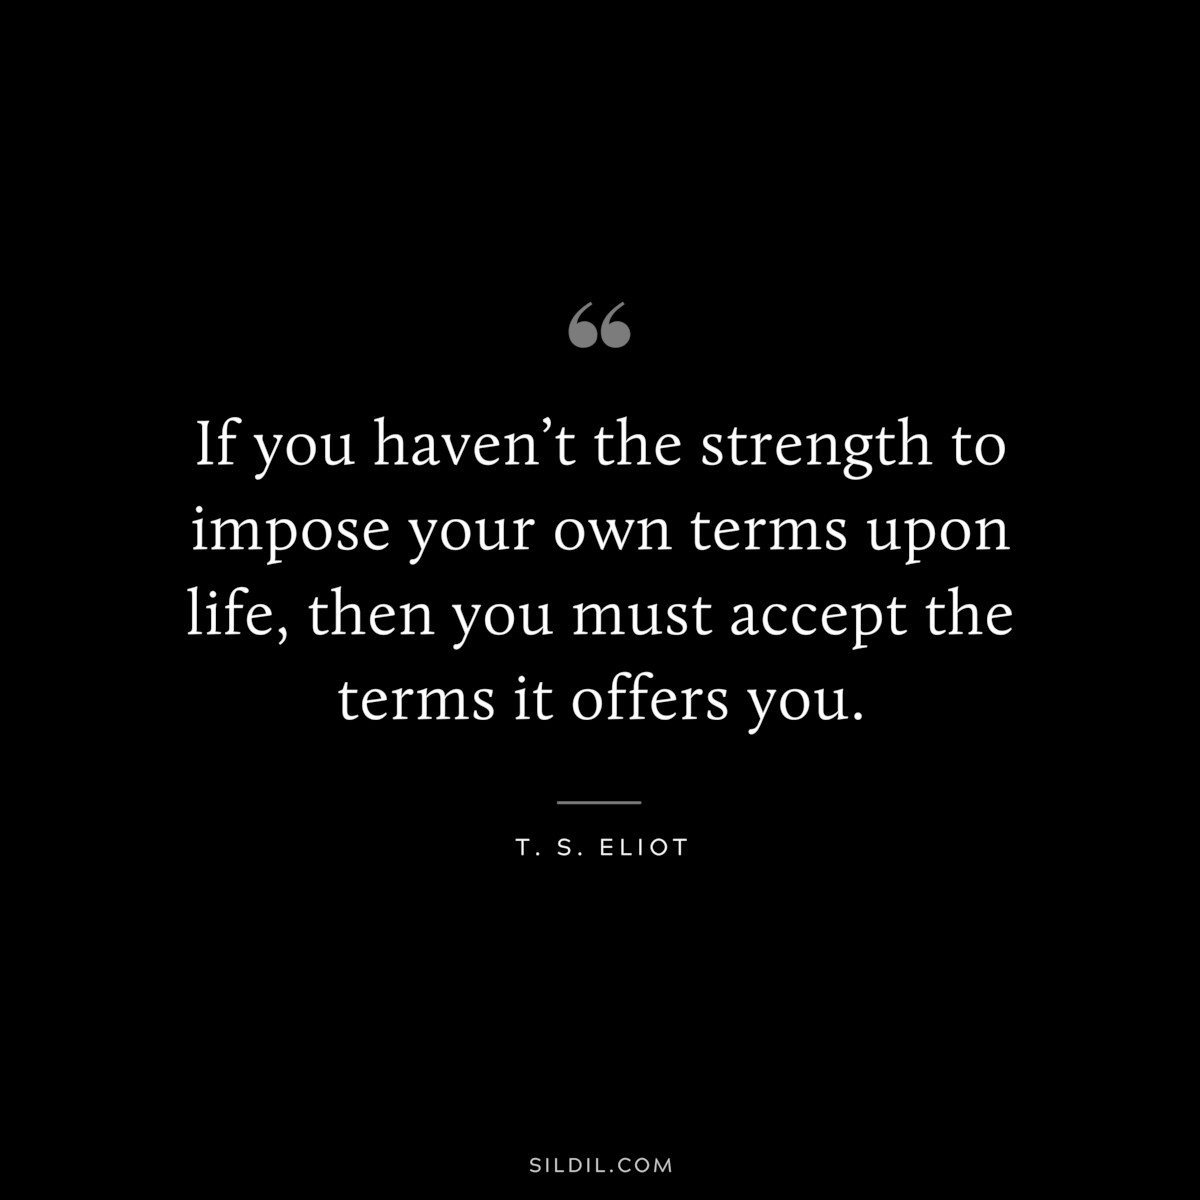 If you haven’t the strength to impose your own terms upon life, then you must accept the terms it offers you. ― T. S. Eliot